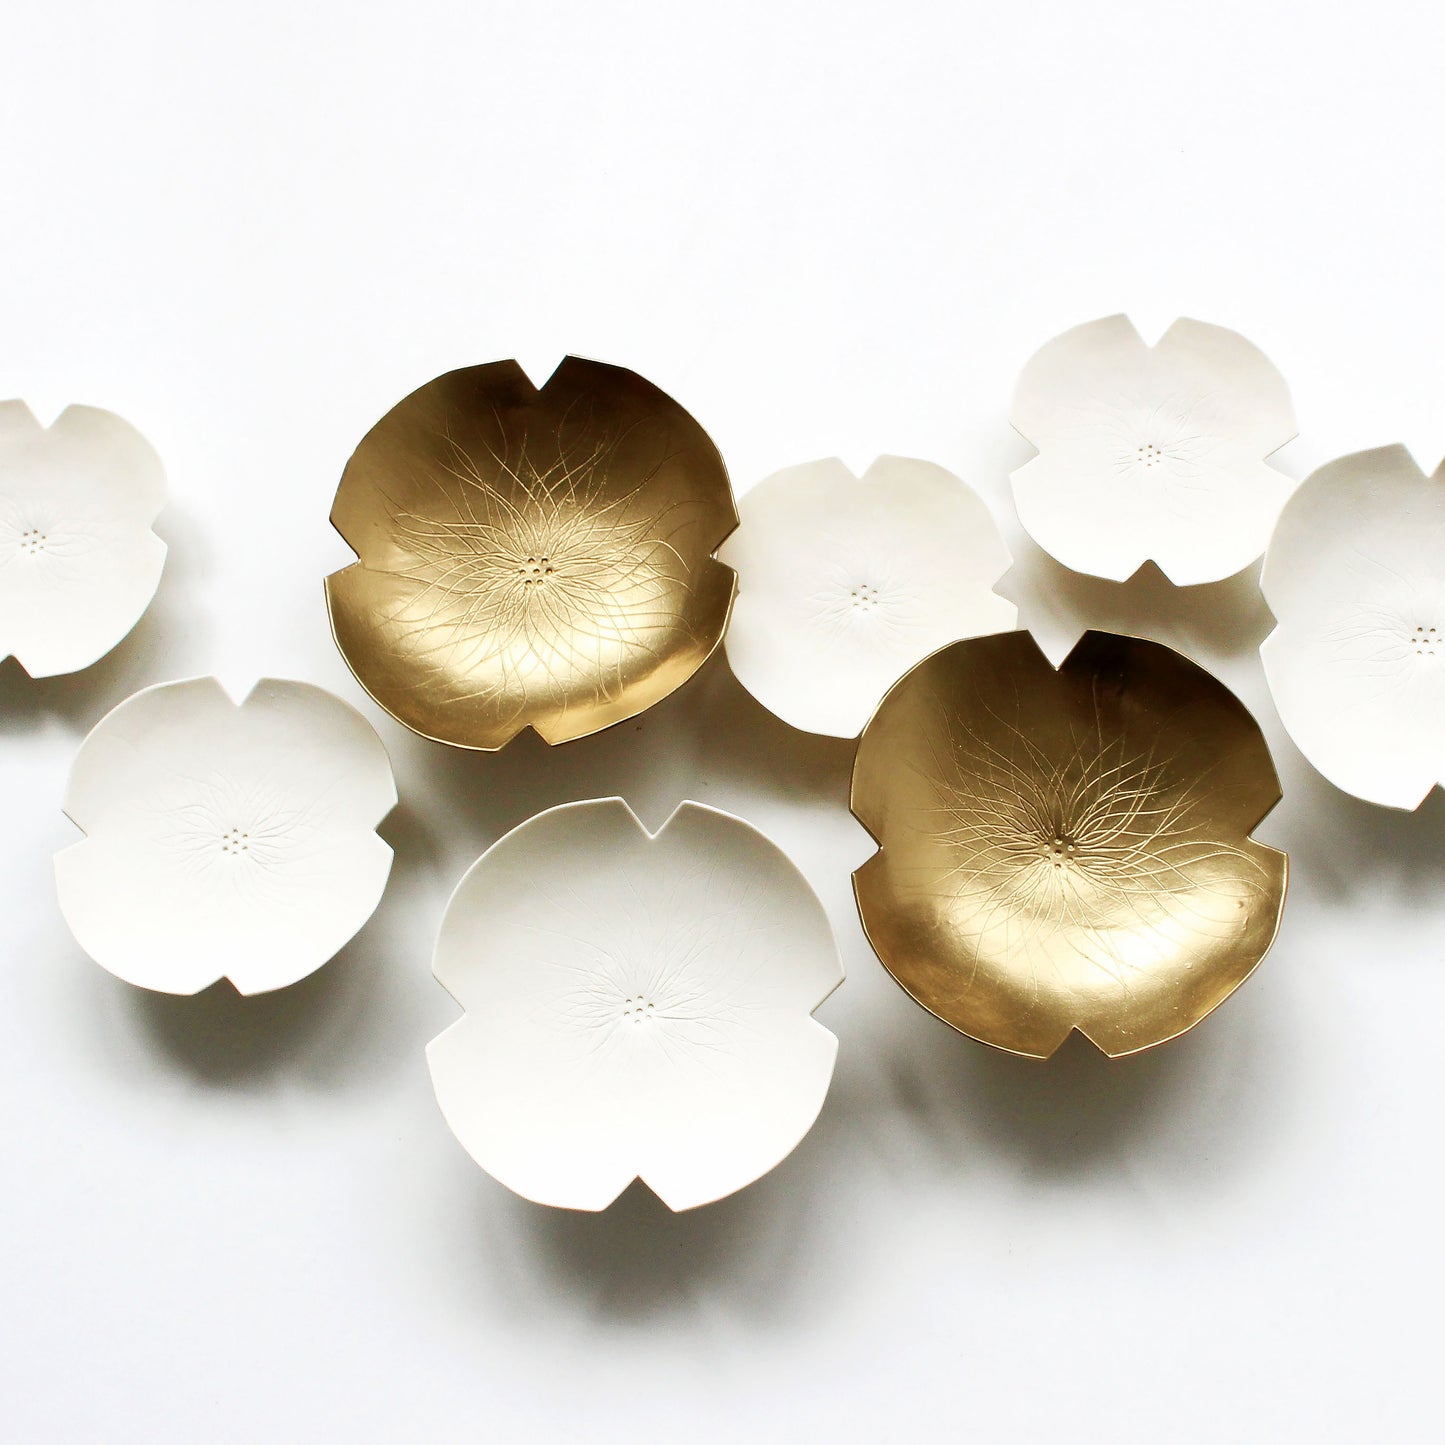 15 Graces Extra Large white & gold wall art Contemporary sculpture Ceramic flowers porcelain Unique modern original artwork MADE TO ORDER